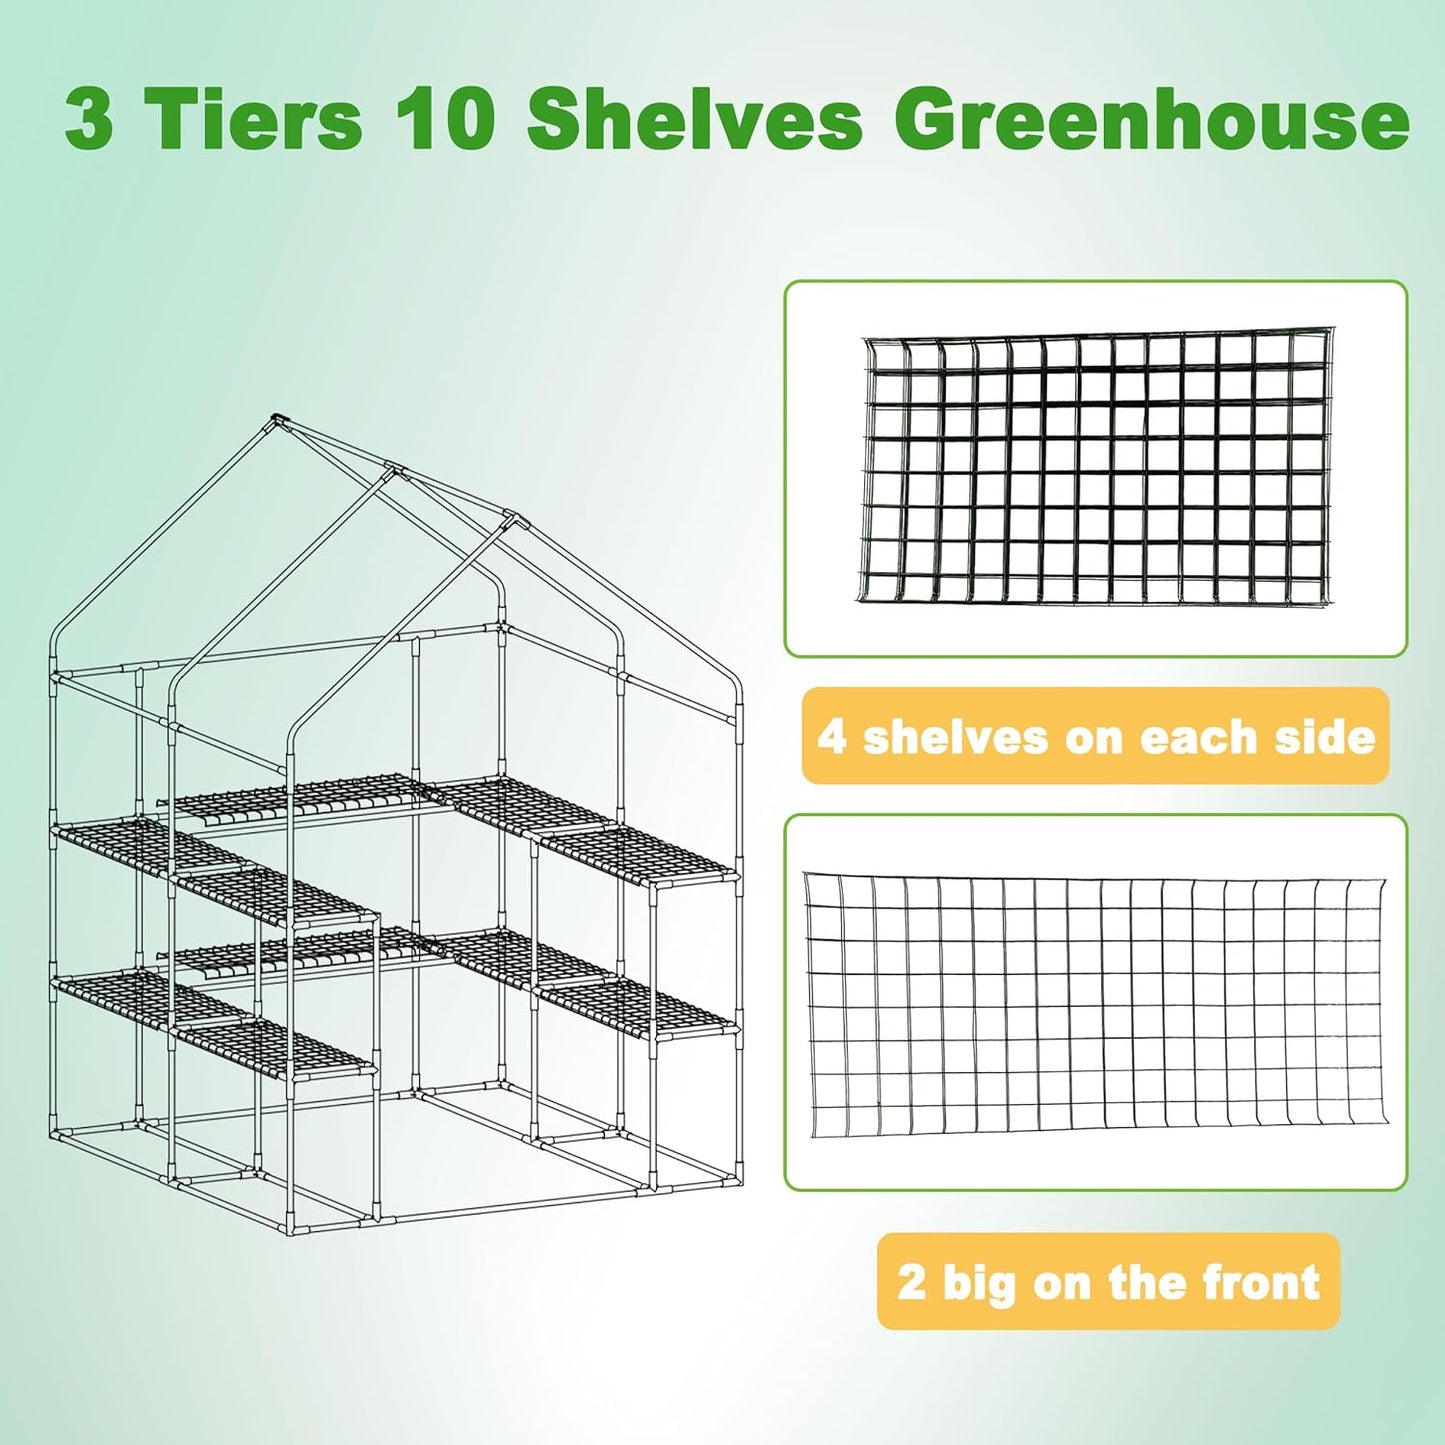 Walk-In Greenhouse for Outdoors, 57X61X80 Inch Large Greenhouse, 3 Tiers 10 Shelves Mini Green House Kit with Observation Windows Roll-Up Door Zipper, Plant Garden Hot House for Herbs, Flowers - Design By Technique